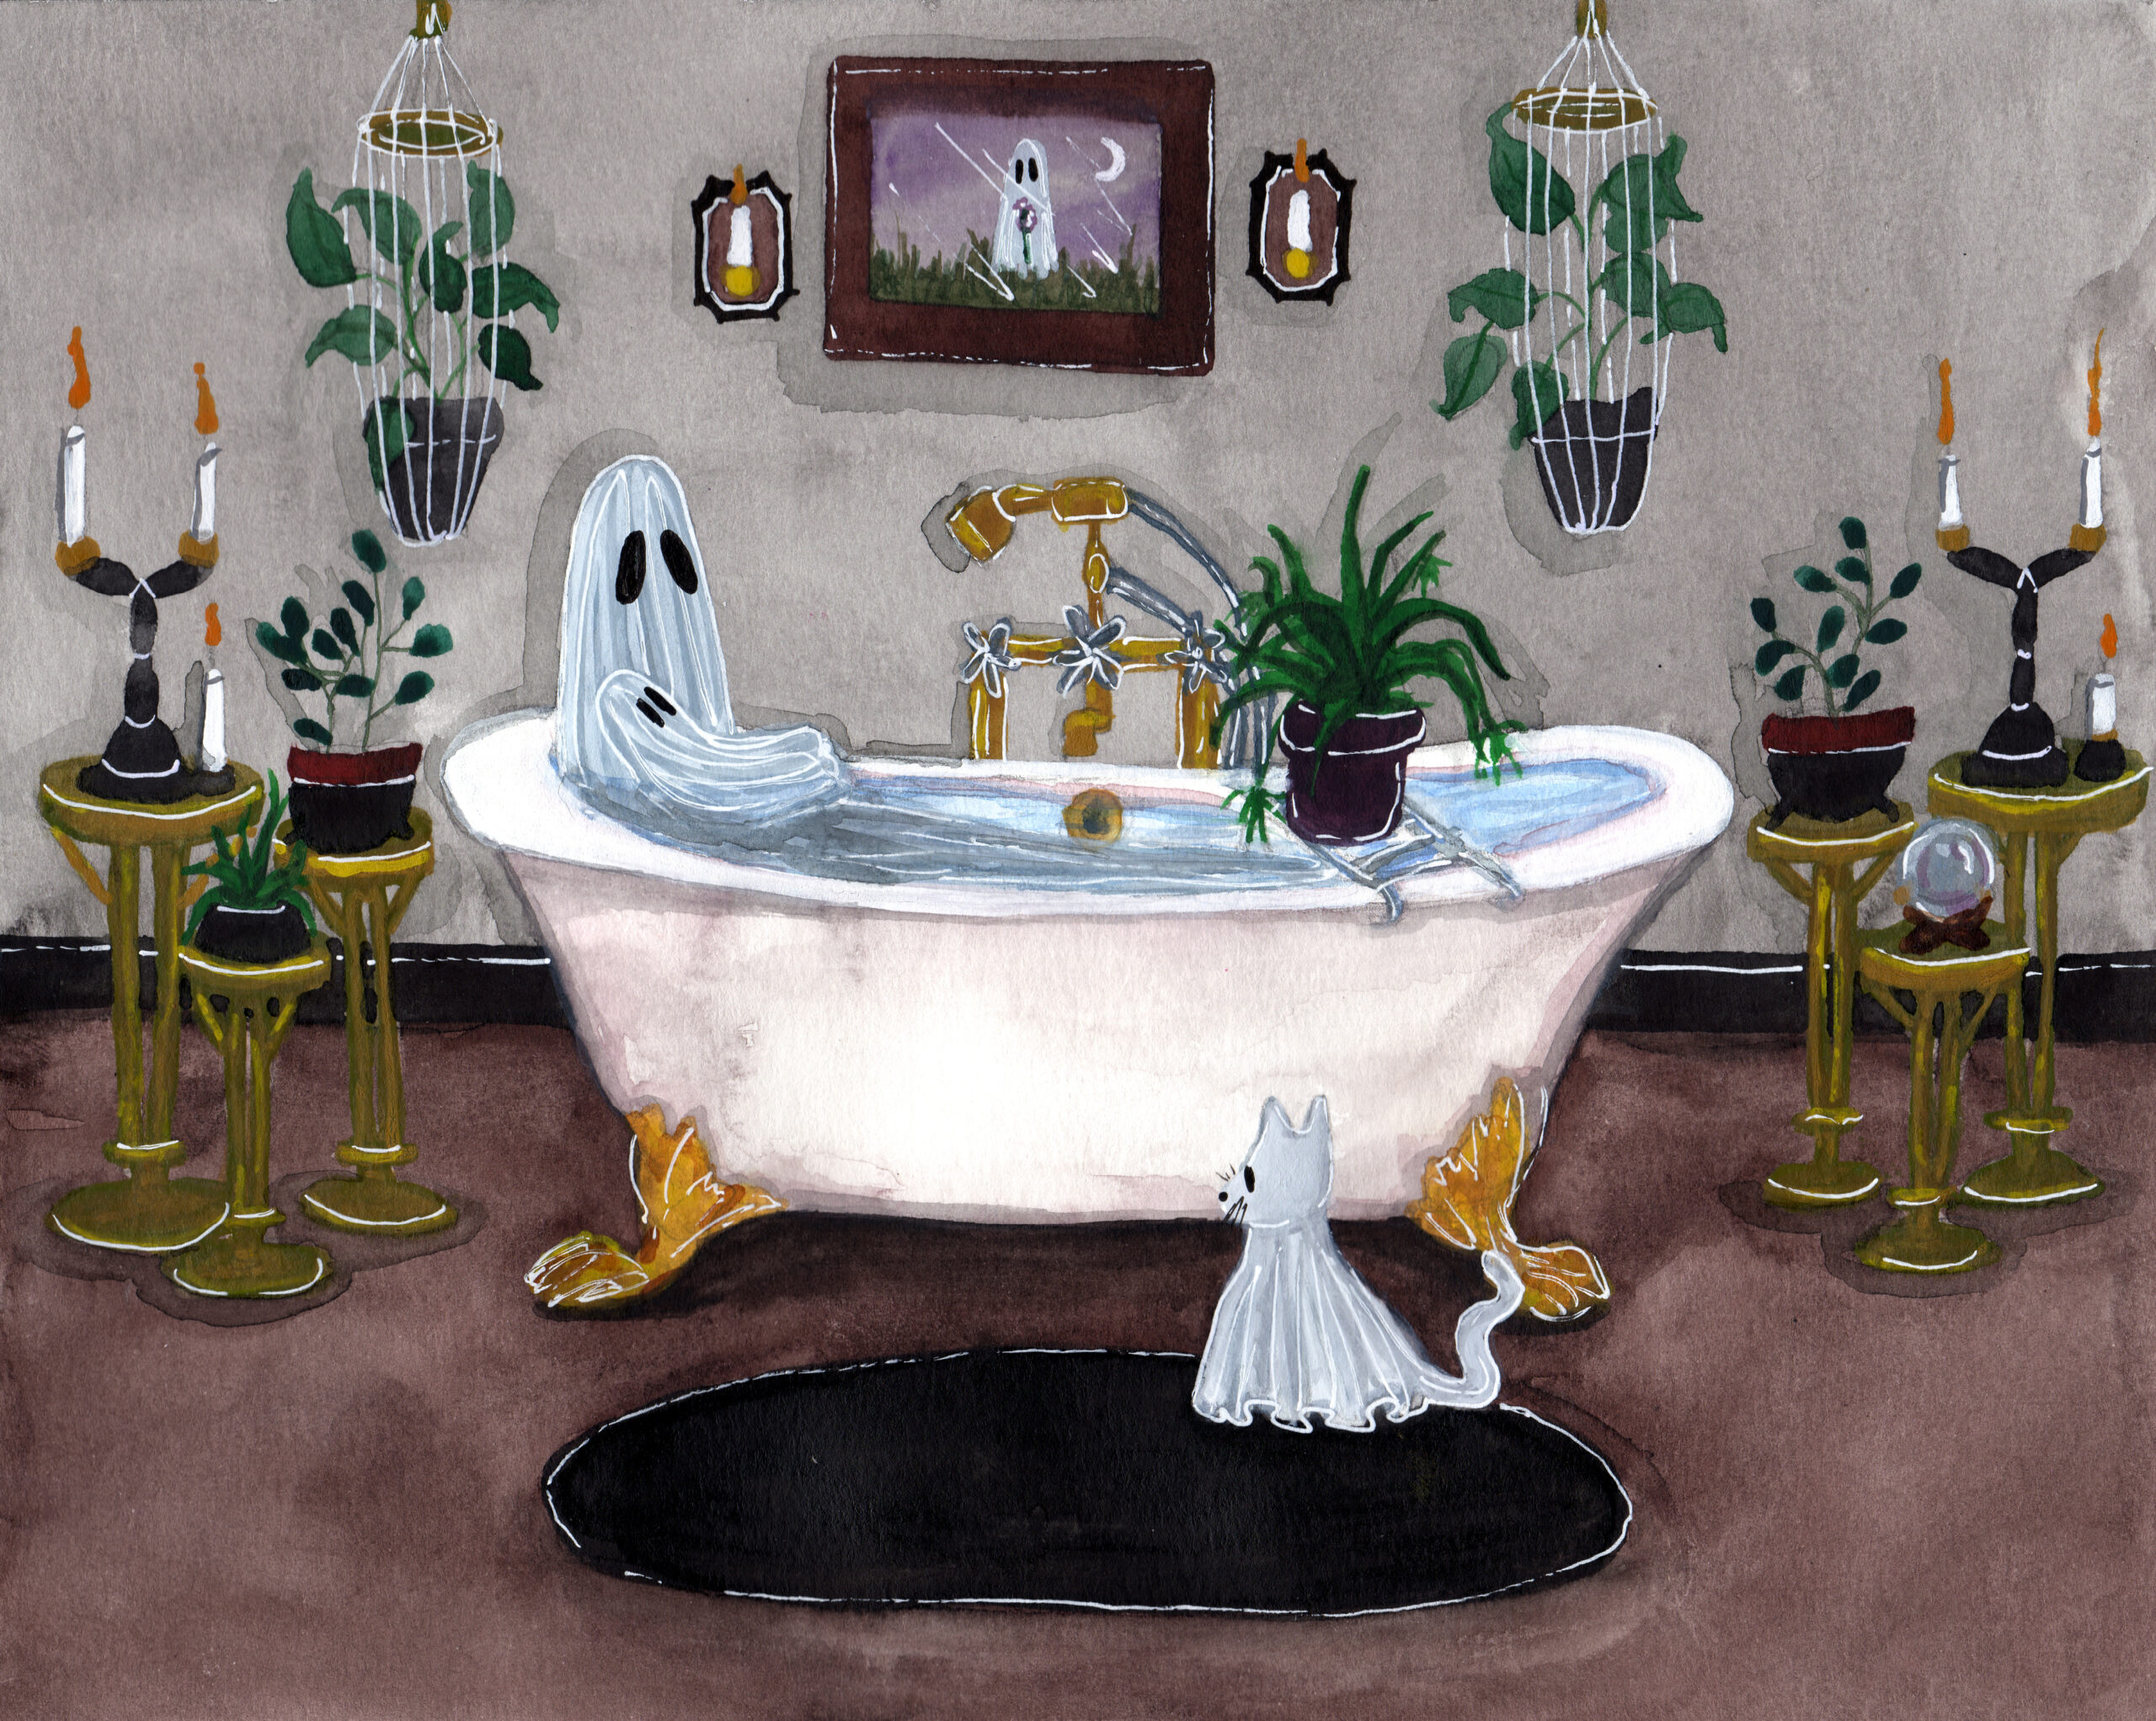 ghosts-in-bath